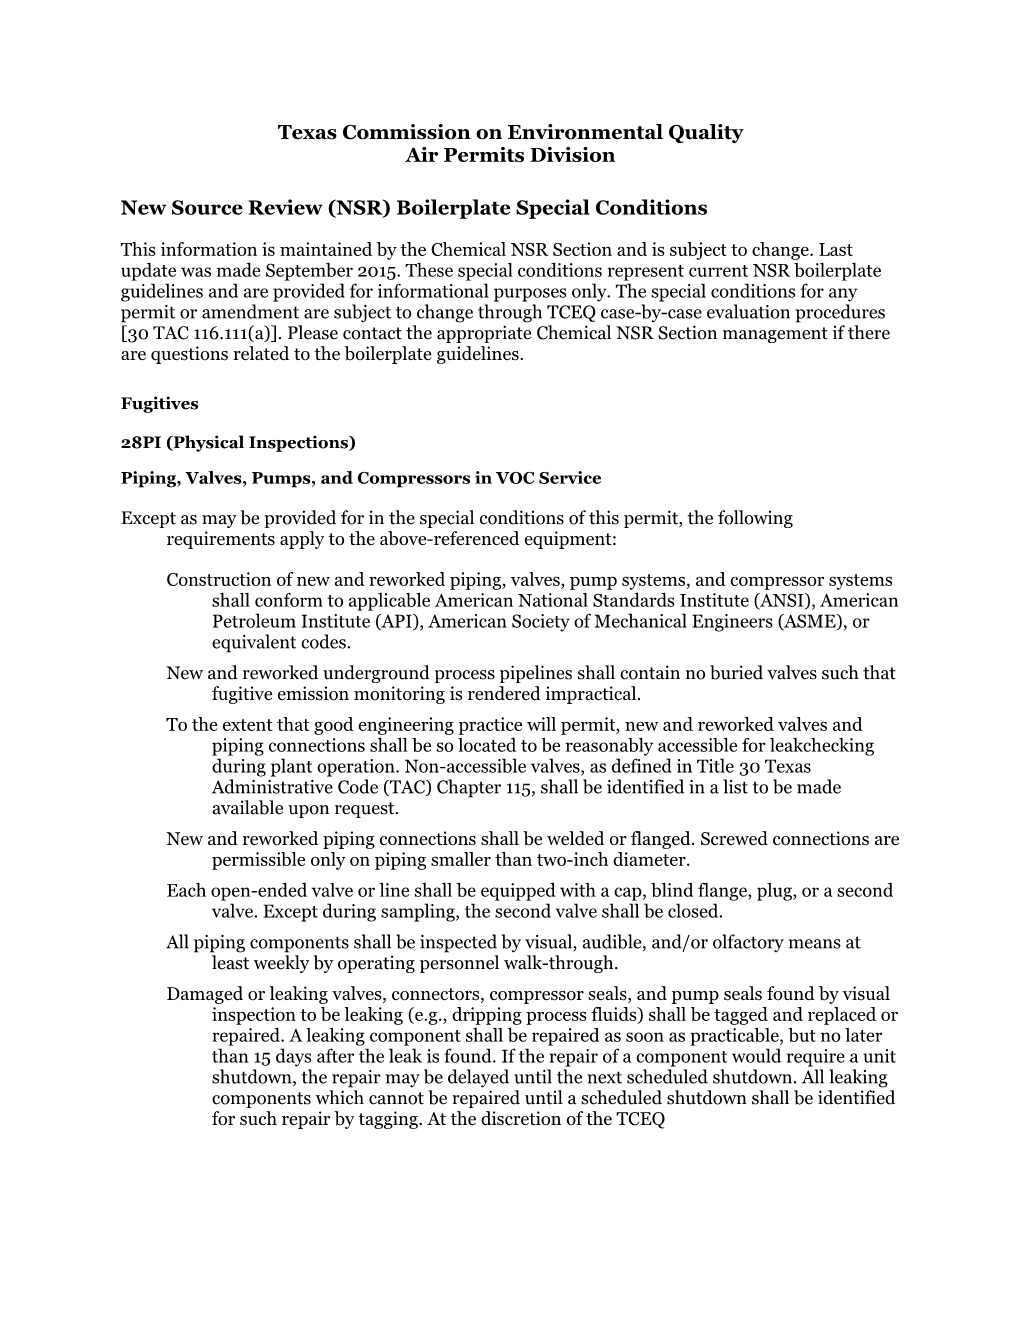 TCEQ-New Source Review (NSR) Boilplate Special Conditions 28 Physical Inspections (PI)